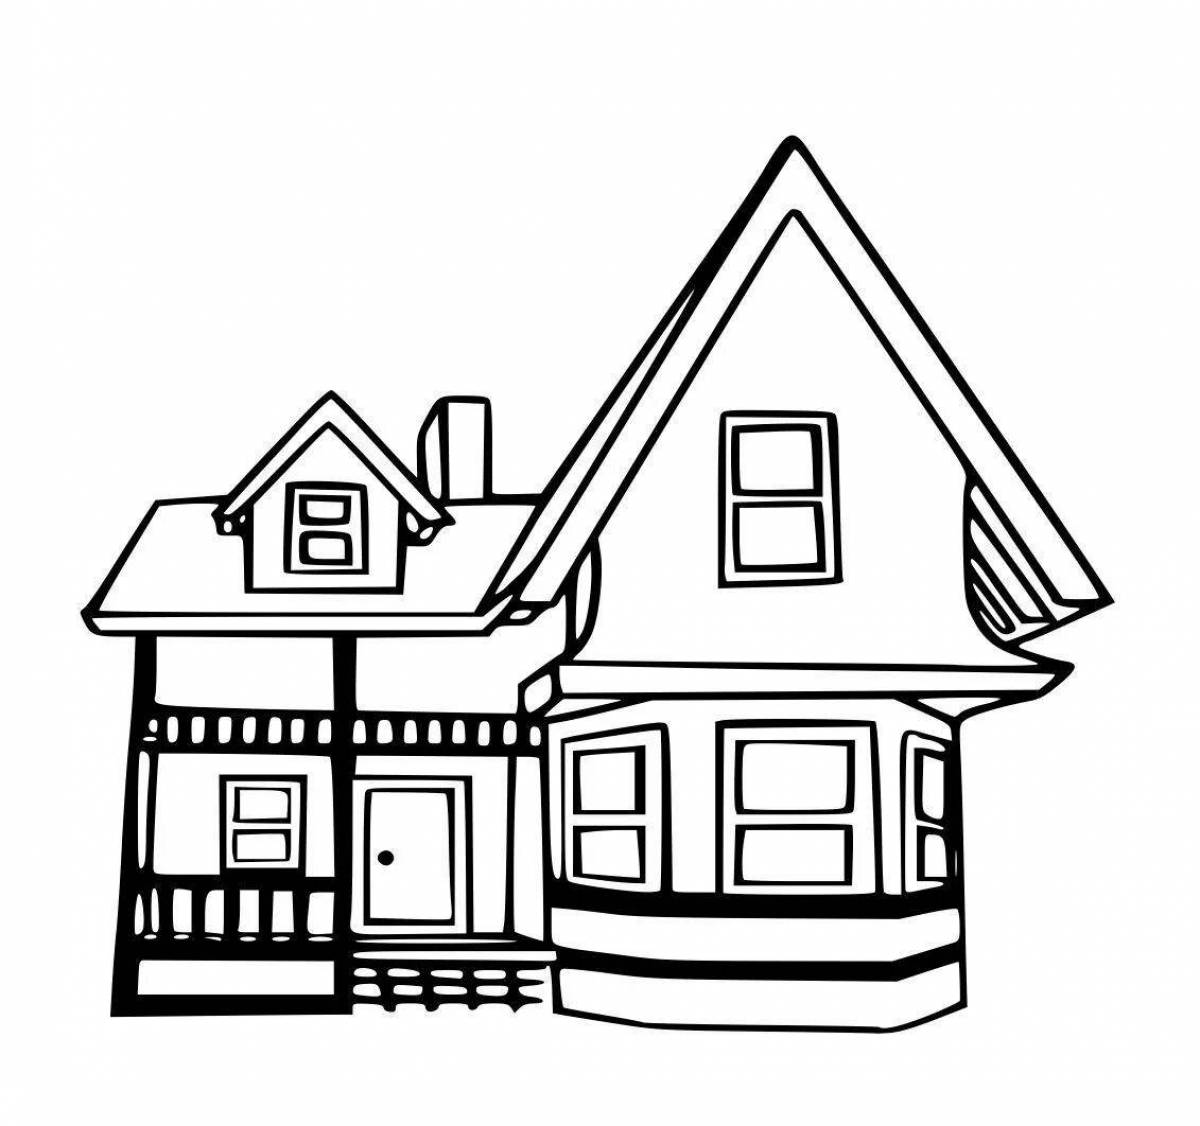 Coloring book cute two-story house for kids